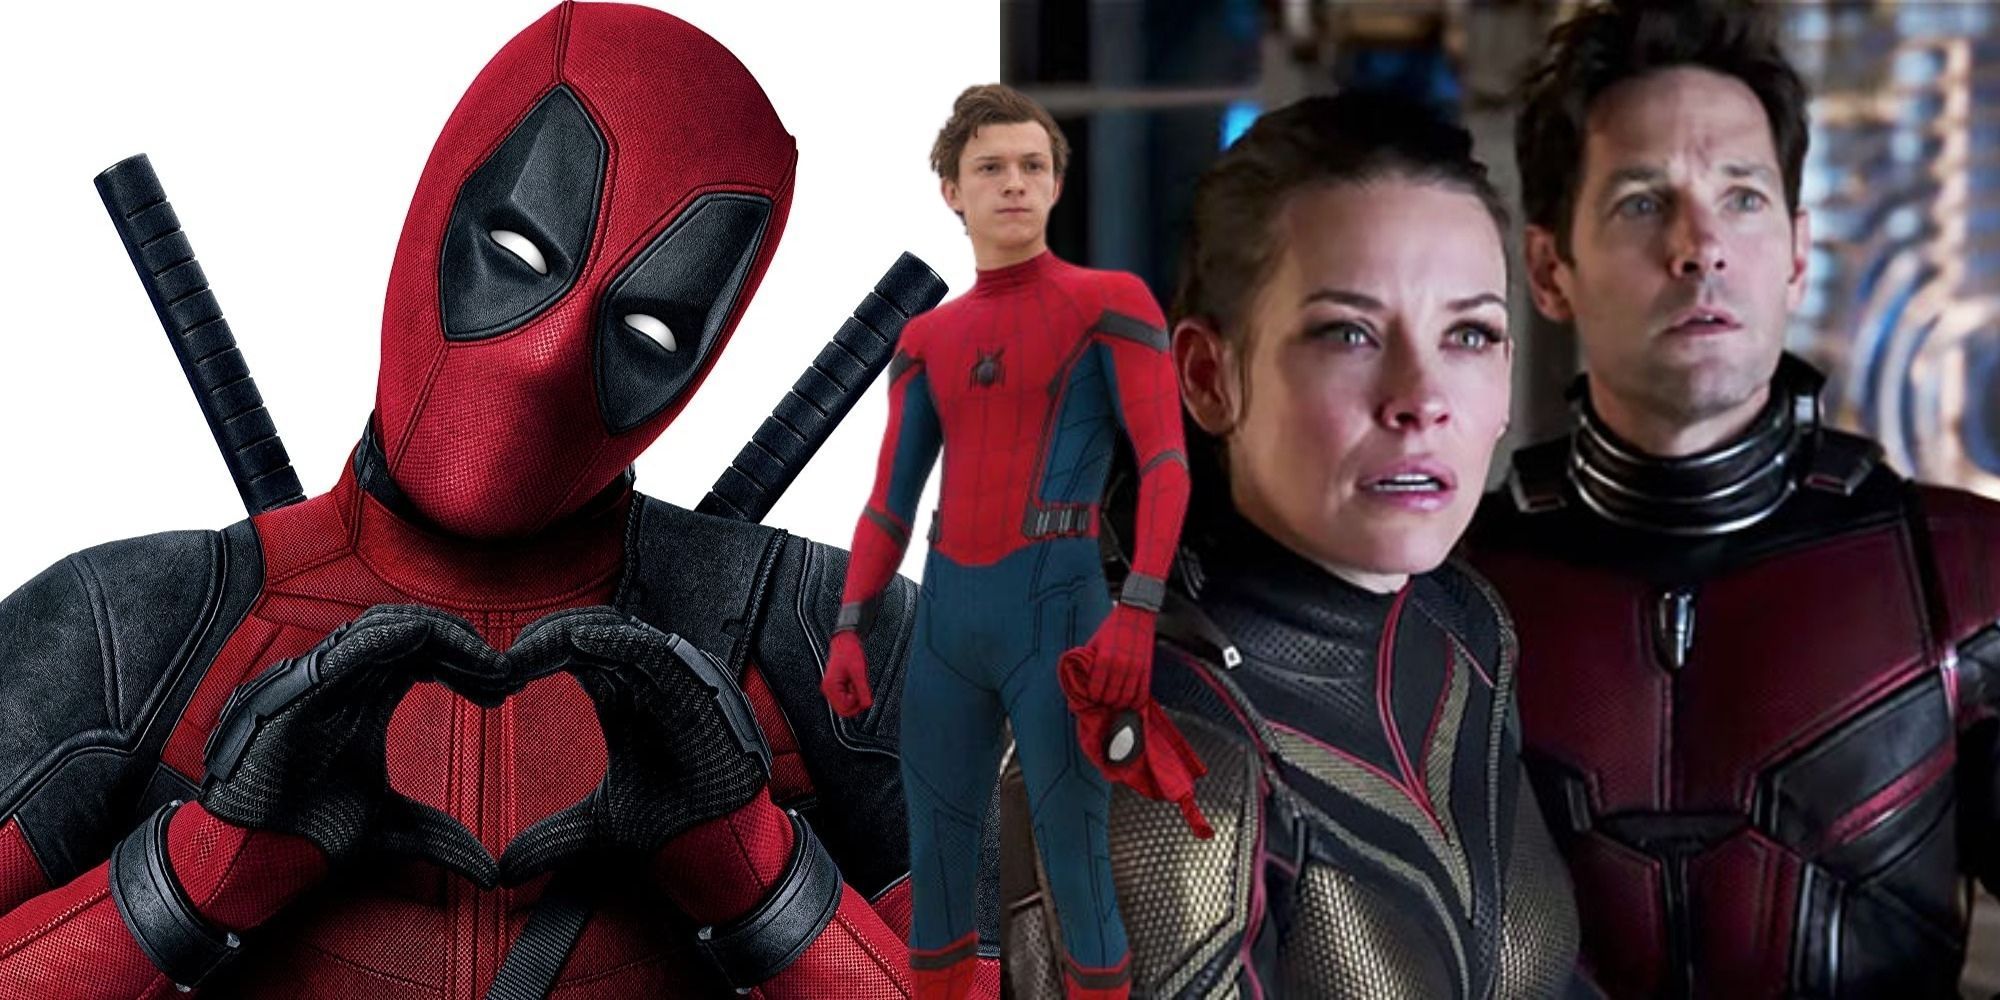 Split image showing Deadpool and Ant-Man and Wasp with Spider-Man in the middle